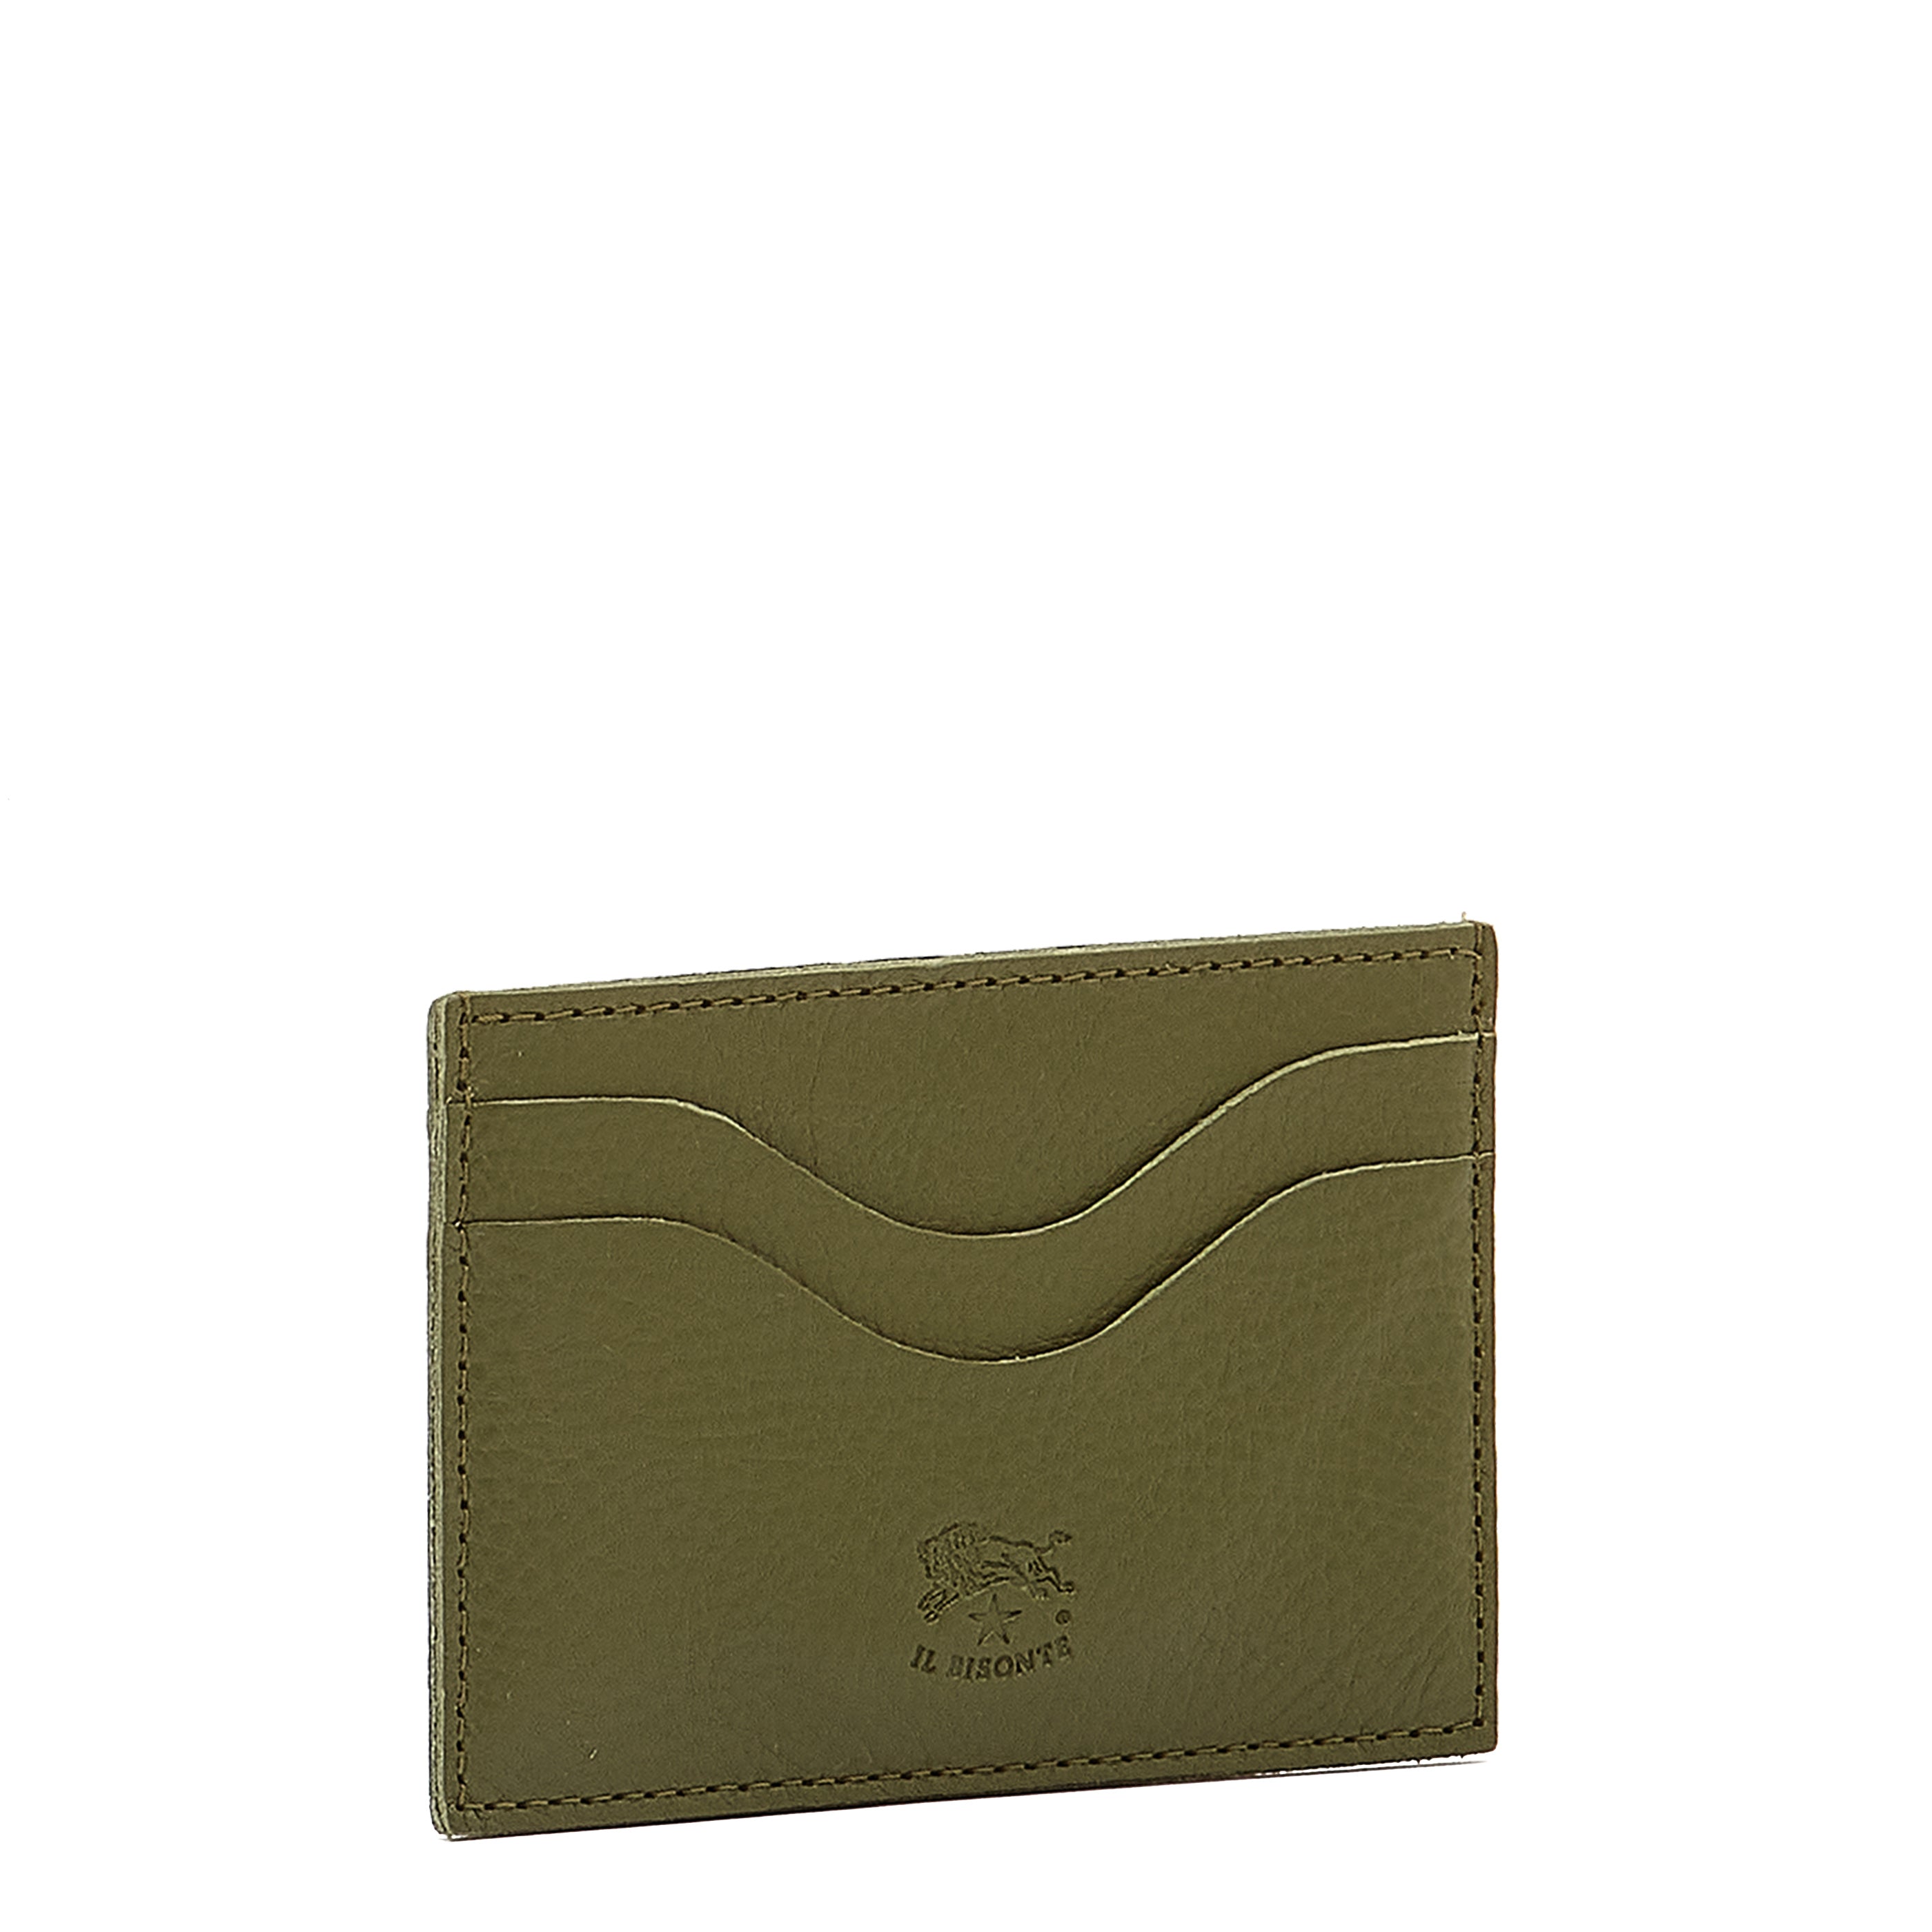 Salina | Card case in leather color cypress